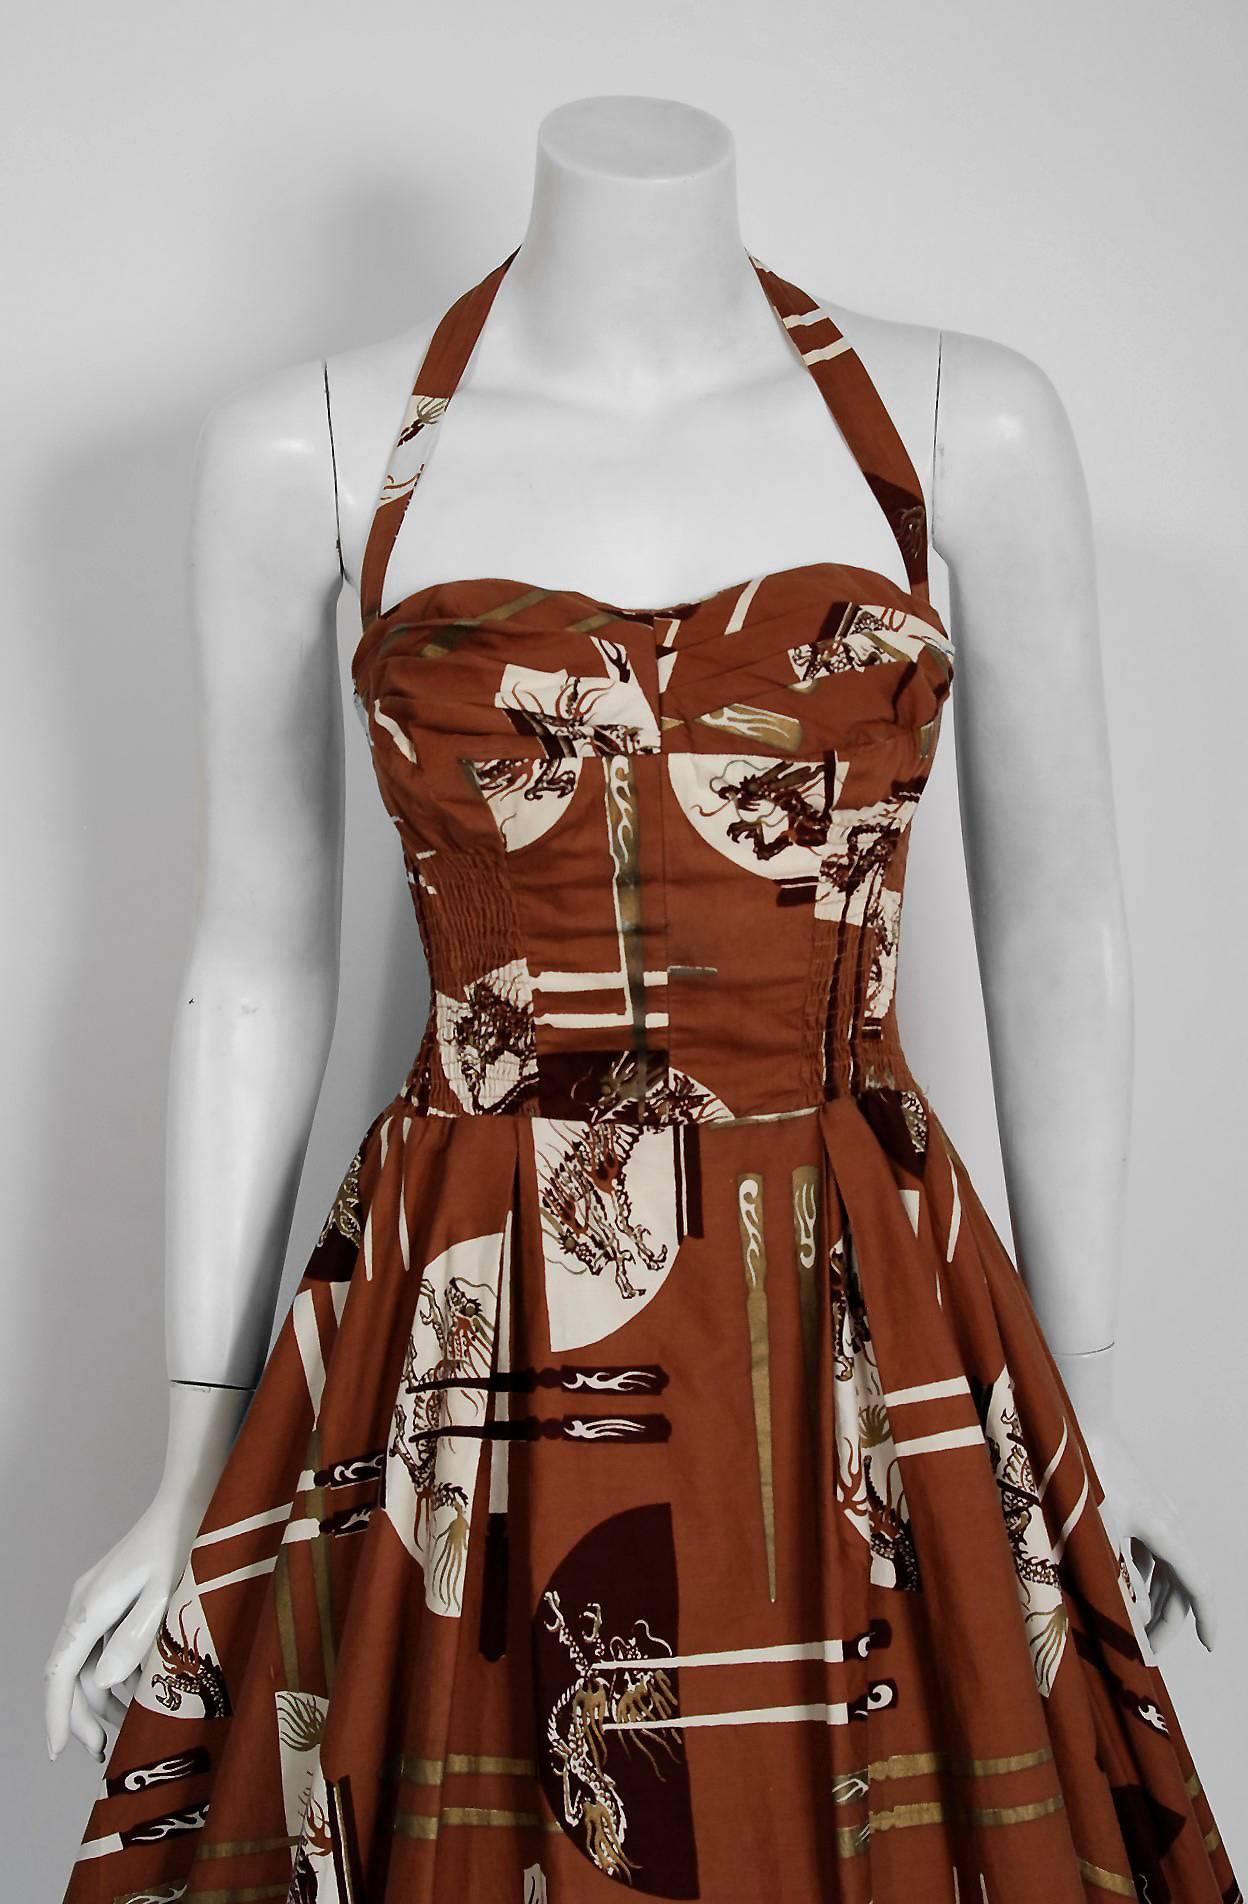 With its vivid cotton novelty and flawless styling, this Alfred Shaheen designer sundress has the casual elegance the 1950's were known for. The print is unbelievable; large scale Chinese dragons with incredible iridescent shimmer. I adore the